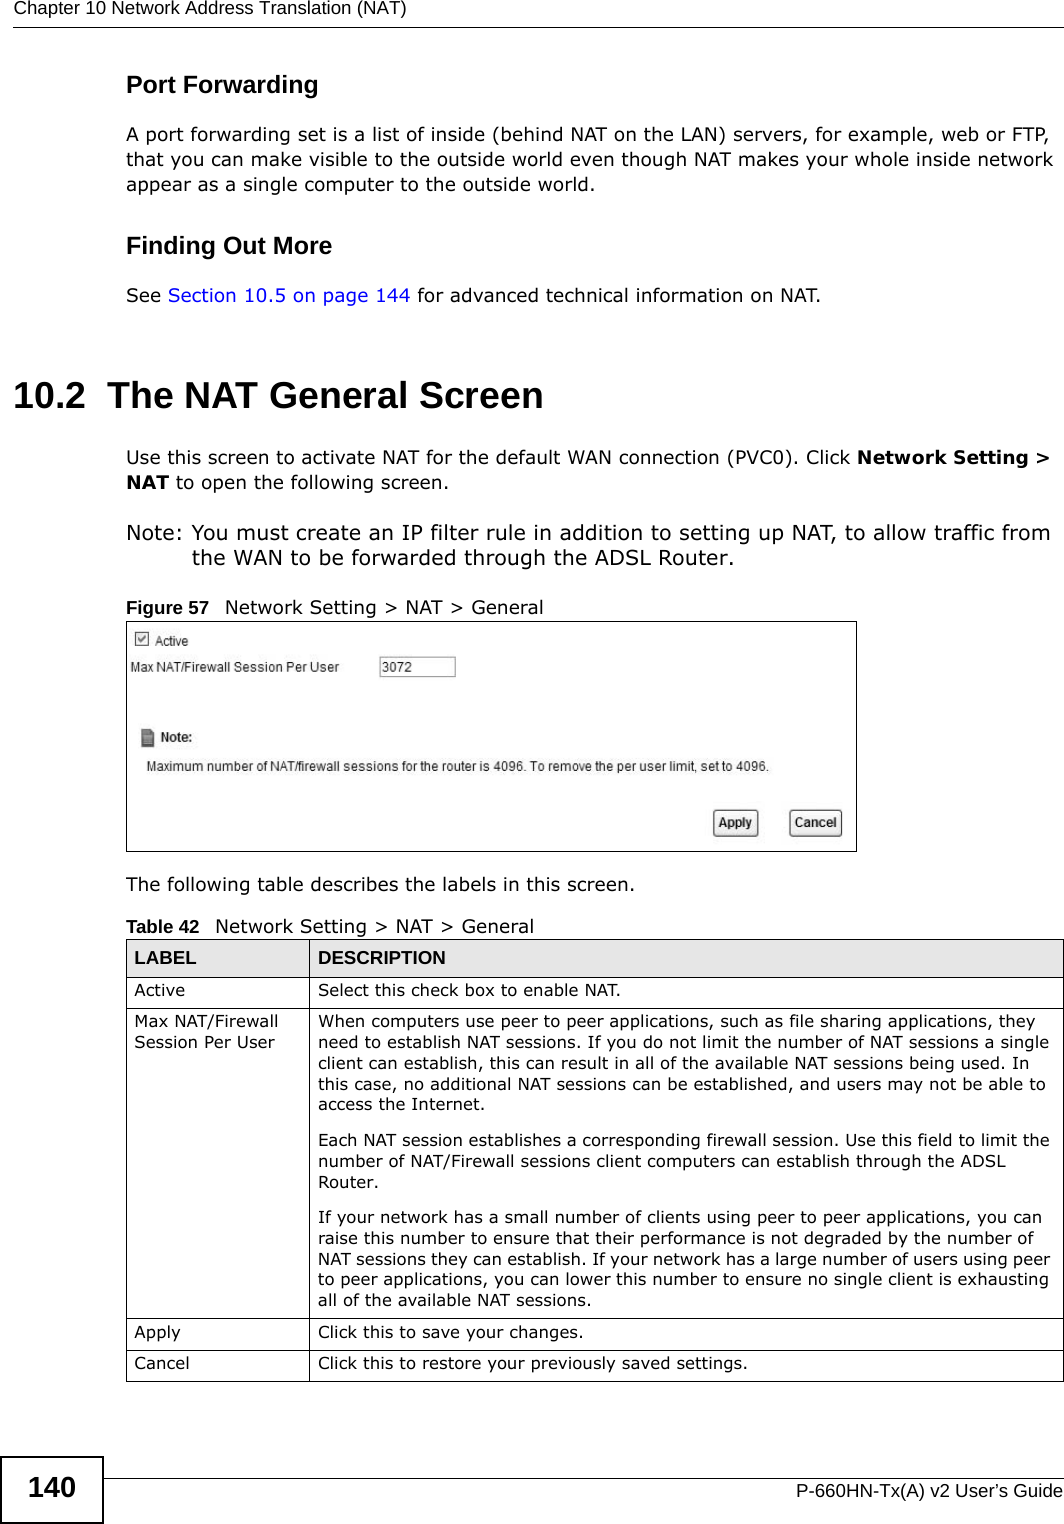 Chapter 10 Network Address Translation (NAT)P-660HN-Tx(A) v2 User’s Guide140Port ForwardingA port forwarding set is a list of inside (behind NAT on the LAN) servers, for example, web or FTP, that you can make visible to the outside world even though NAT makes your whole inside network appear as a single computer to the outside world.Finding Out MoreSee Section 10.5 on page 144 for advanced technical information on NAT.10.2  The NAT General ScreenUse this screen to activate NAT for the default WAN connection (PVC0). Click Network Setting &gt; NAT to open the following screen.Note: You must create an IP filter rule in addition to setting up NAT, to allow traffic from the WAN to be forwarded through the ADSL Router.Figure 57   Network Setting &gt; NAT &gt; GeneralThe following table describes the labels in this screen.Table 42   Network Setting &gt; NAT &gt; GeneralLABEL DESCRIPTIONActive Select this check box to enable NAT.Max NAT/Firewall Session Per UserWhen computers use peer to peer applications, such as file sharing applications, they need to establish NAT sessions. If you do not limit the number of NAT sessions a single client can establish, this can result in all of the available NAT sessions being used. In this case, no additional NAT sessions can be established, and users may not be able to access the Internet.Each NAT session establishes a corresponding firewall session. Use this field to limit the number of NAT/Firewall sessions client computers can establish through the ADSL Router.If your network has a small number of clients using peer to peer applications, you can raise this number to ensure that their performance is not degraded by the number of NAT sessions they can establish. If your network has a large number of users using peer to peer applications, you can lower this number to ensure no single client is exhausting all of the available NAT sessions.Apply Click this to save your changes.Cancel Click this to restore your previously saved settings.